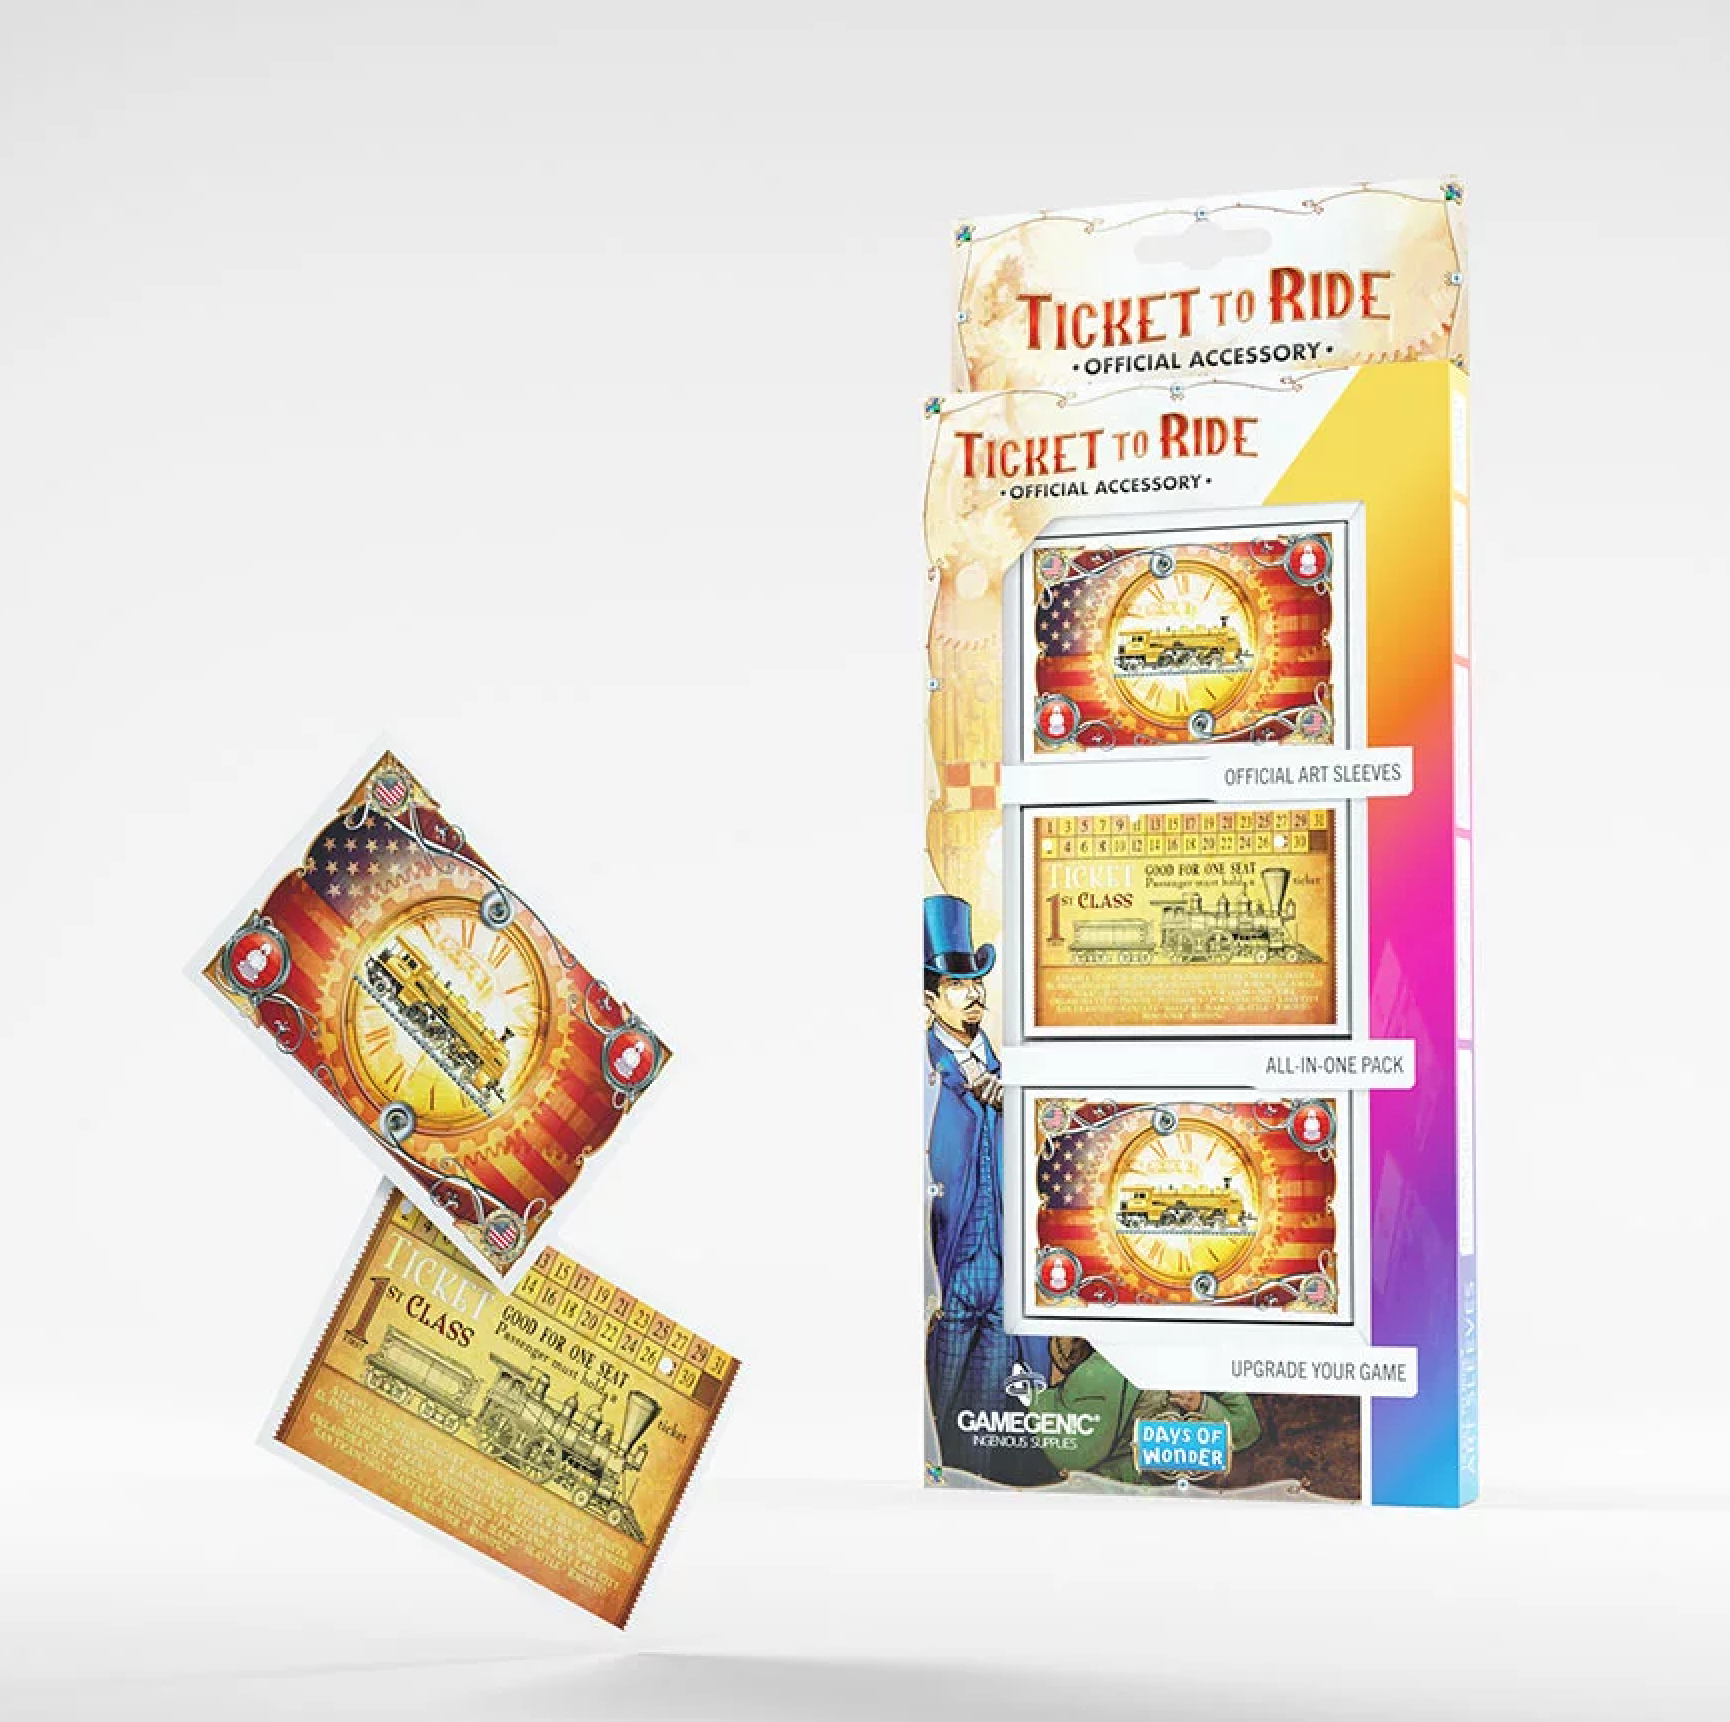 Ticket To Ride: Art Sleeves